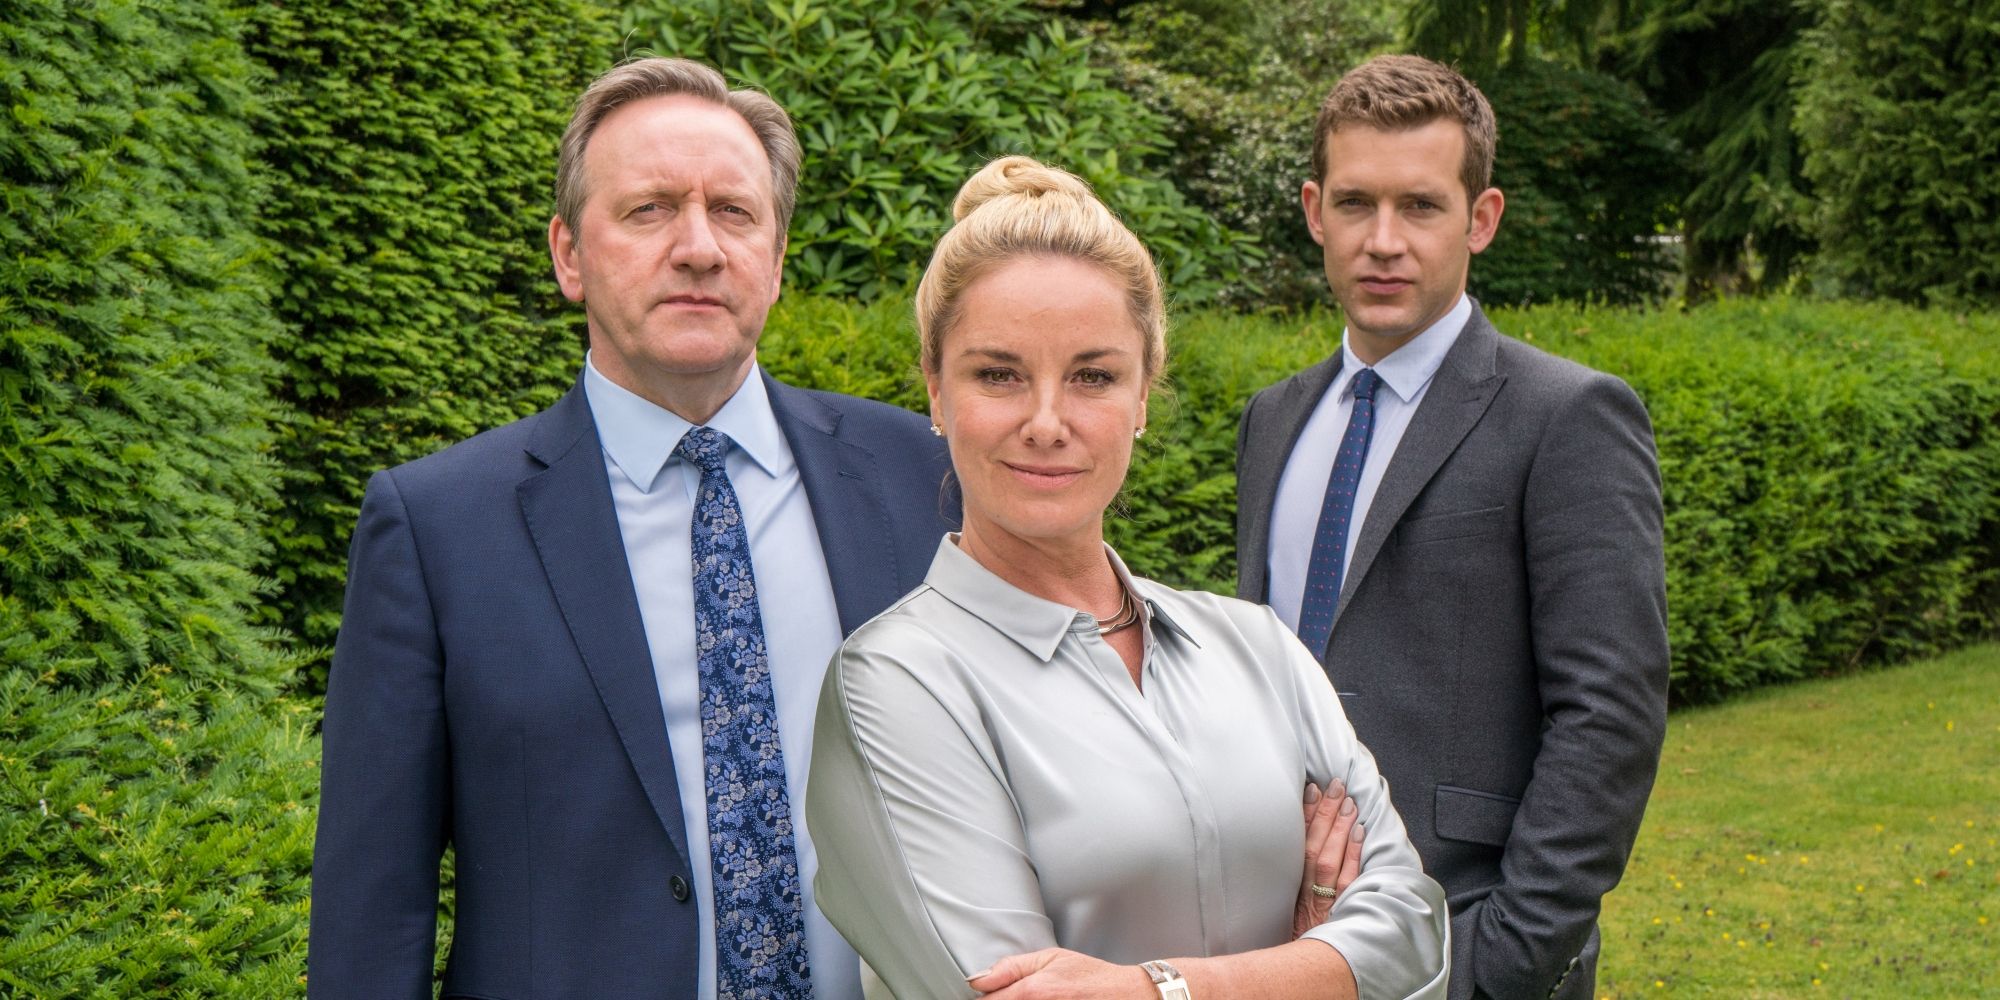 The cast of Midsomer Murders pose for a promo shot